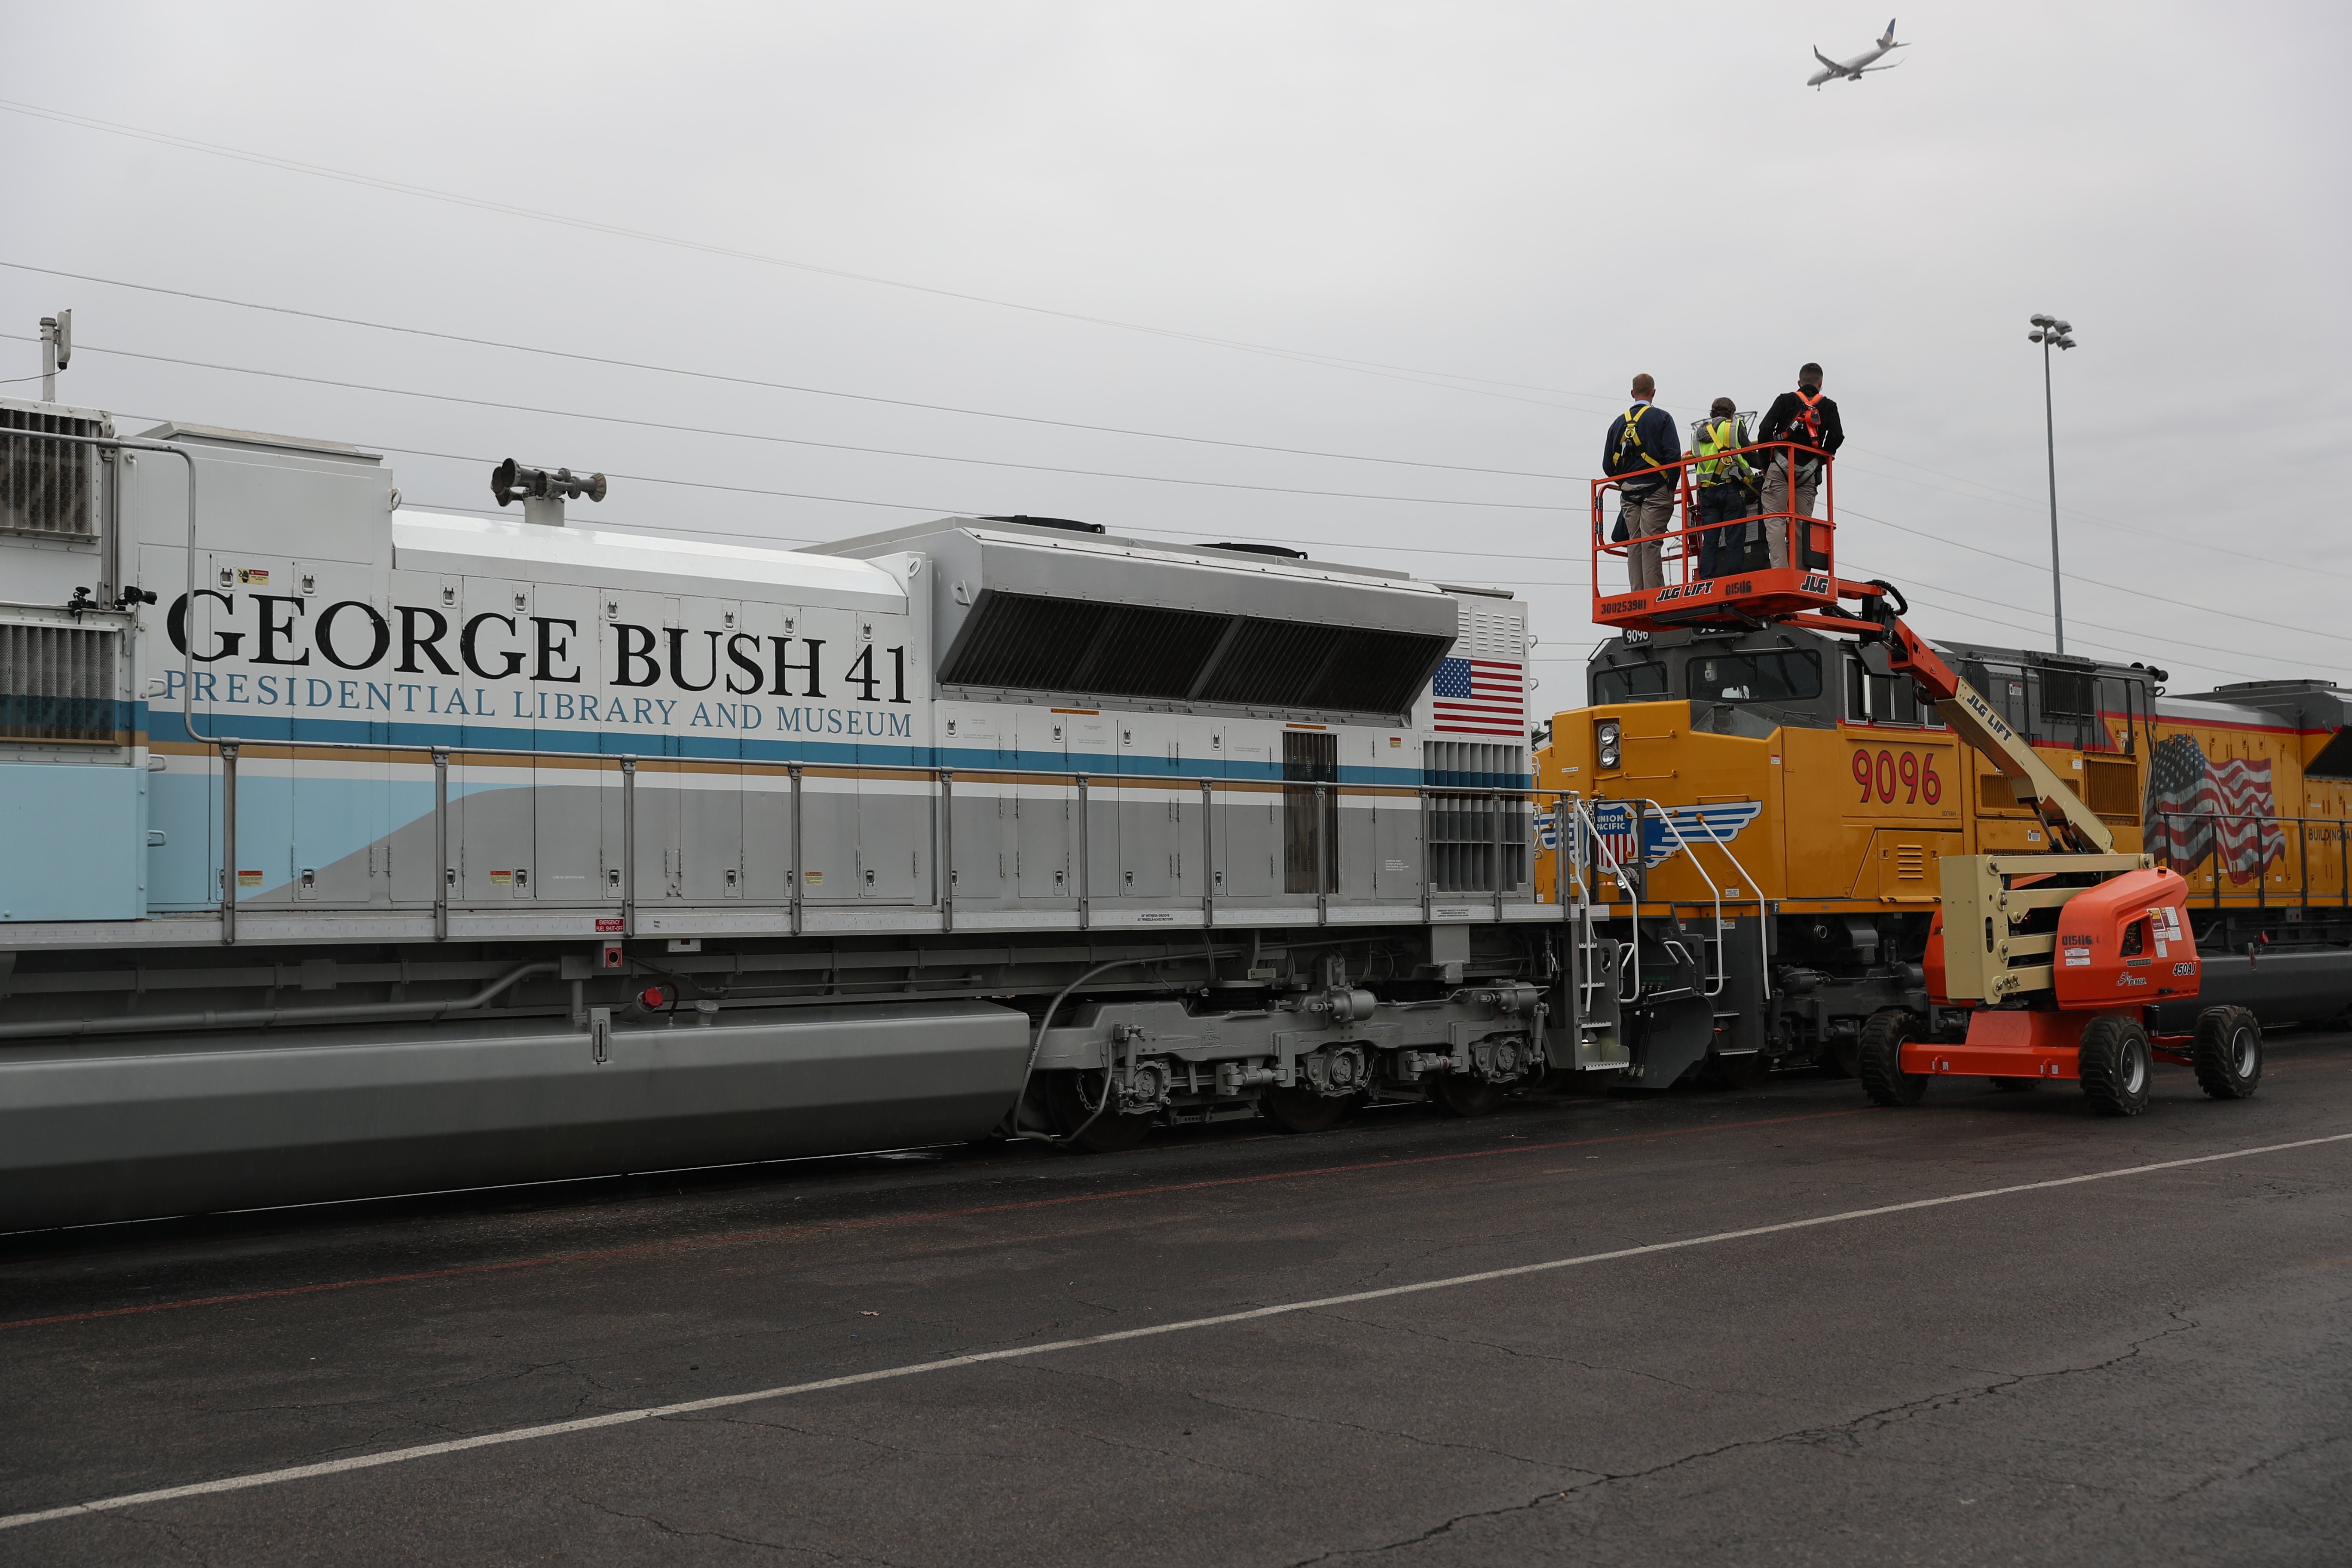 A Union Pacific locomotive, painted to look like Air Force One, will carry former President George H.W. Bush to his resting place in College Station, Texas waits at the station on December 6, 2018 in Spring, Texas. (Photo by Joe Raedle/Getty Images)